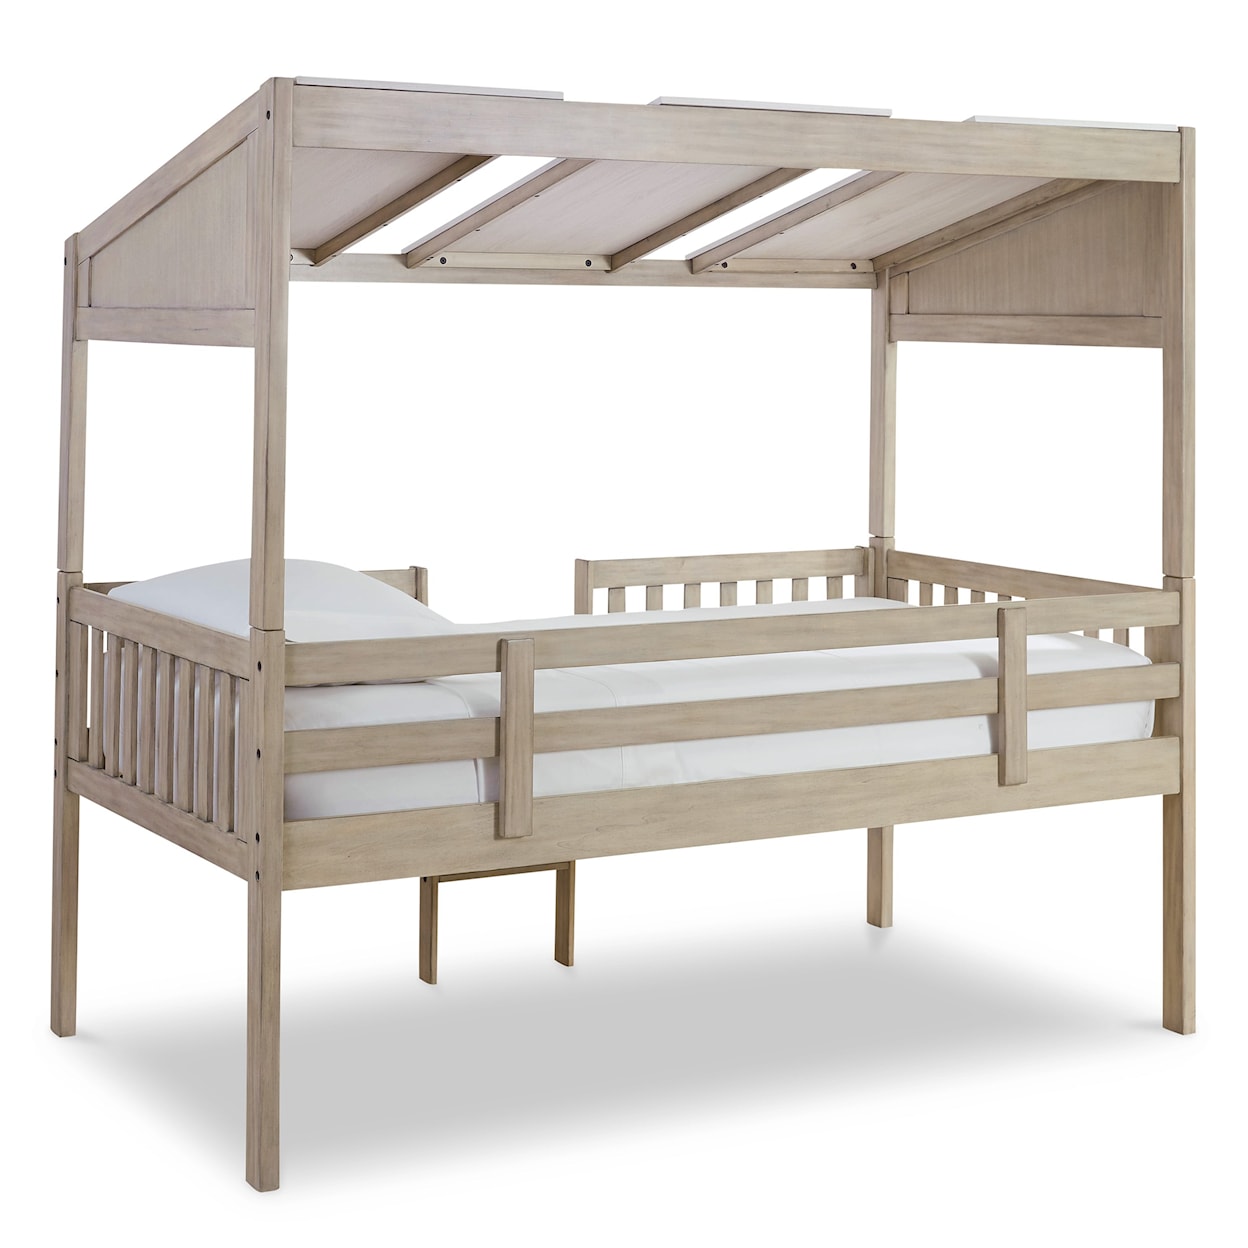 Signature Design by Ashley Furniture Wrenalyn Twin Loft Bed with Roof